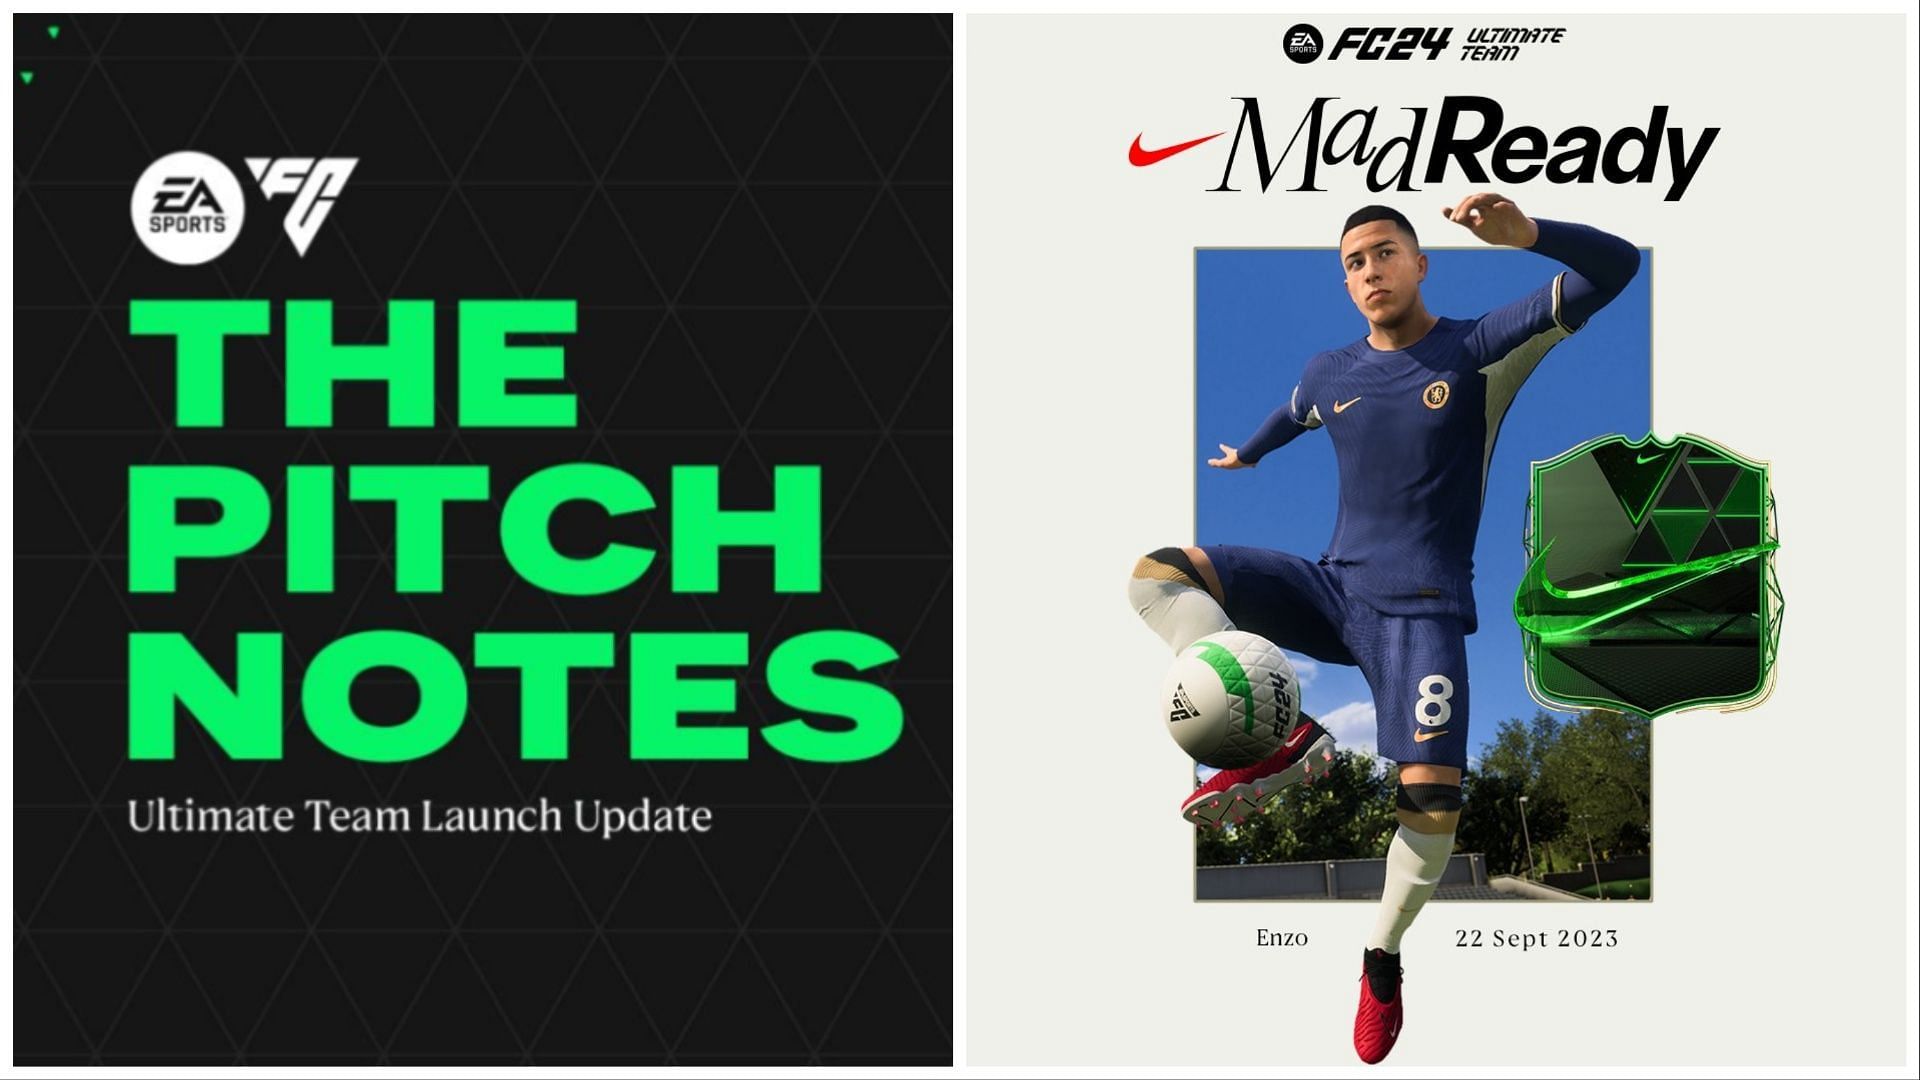 The Nike Mad Ready promo appears promising (Images via EA Sports)